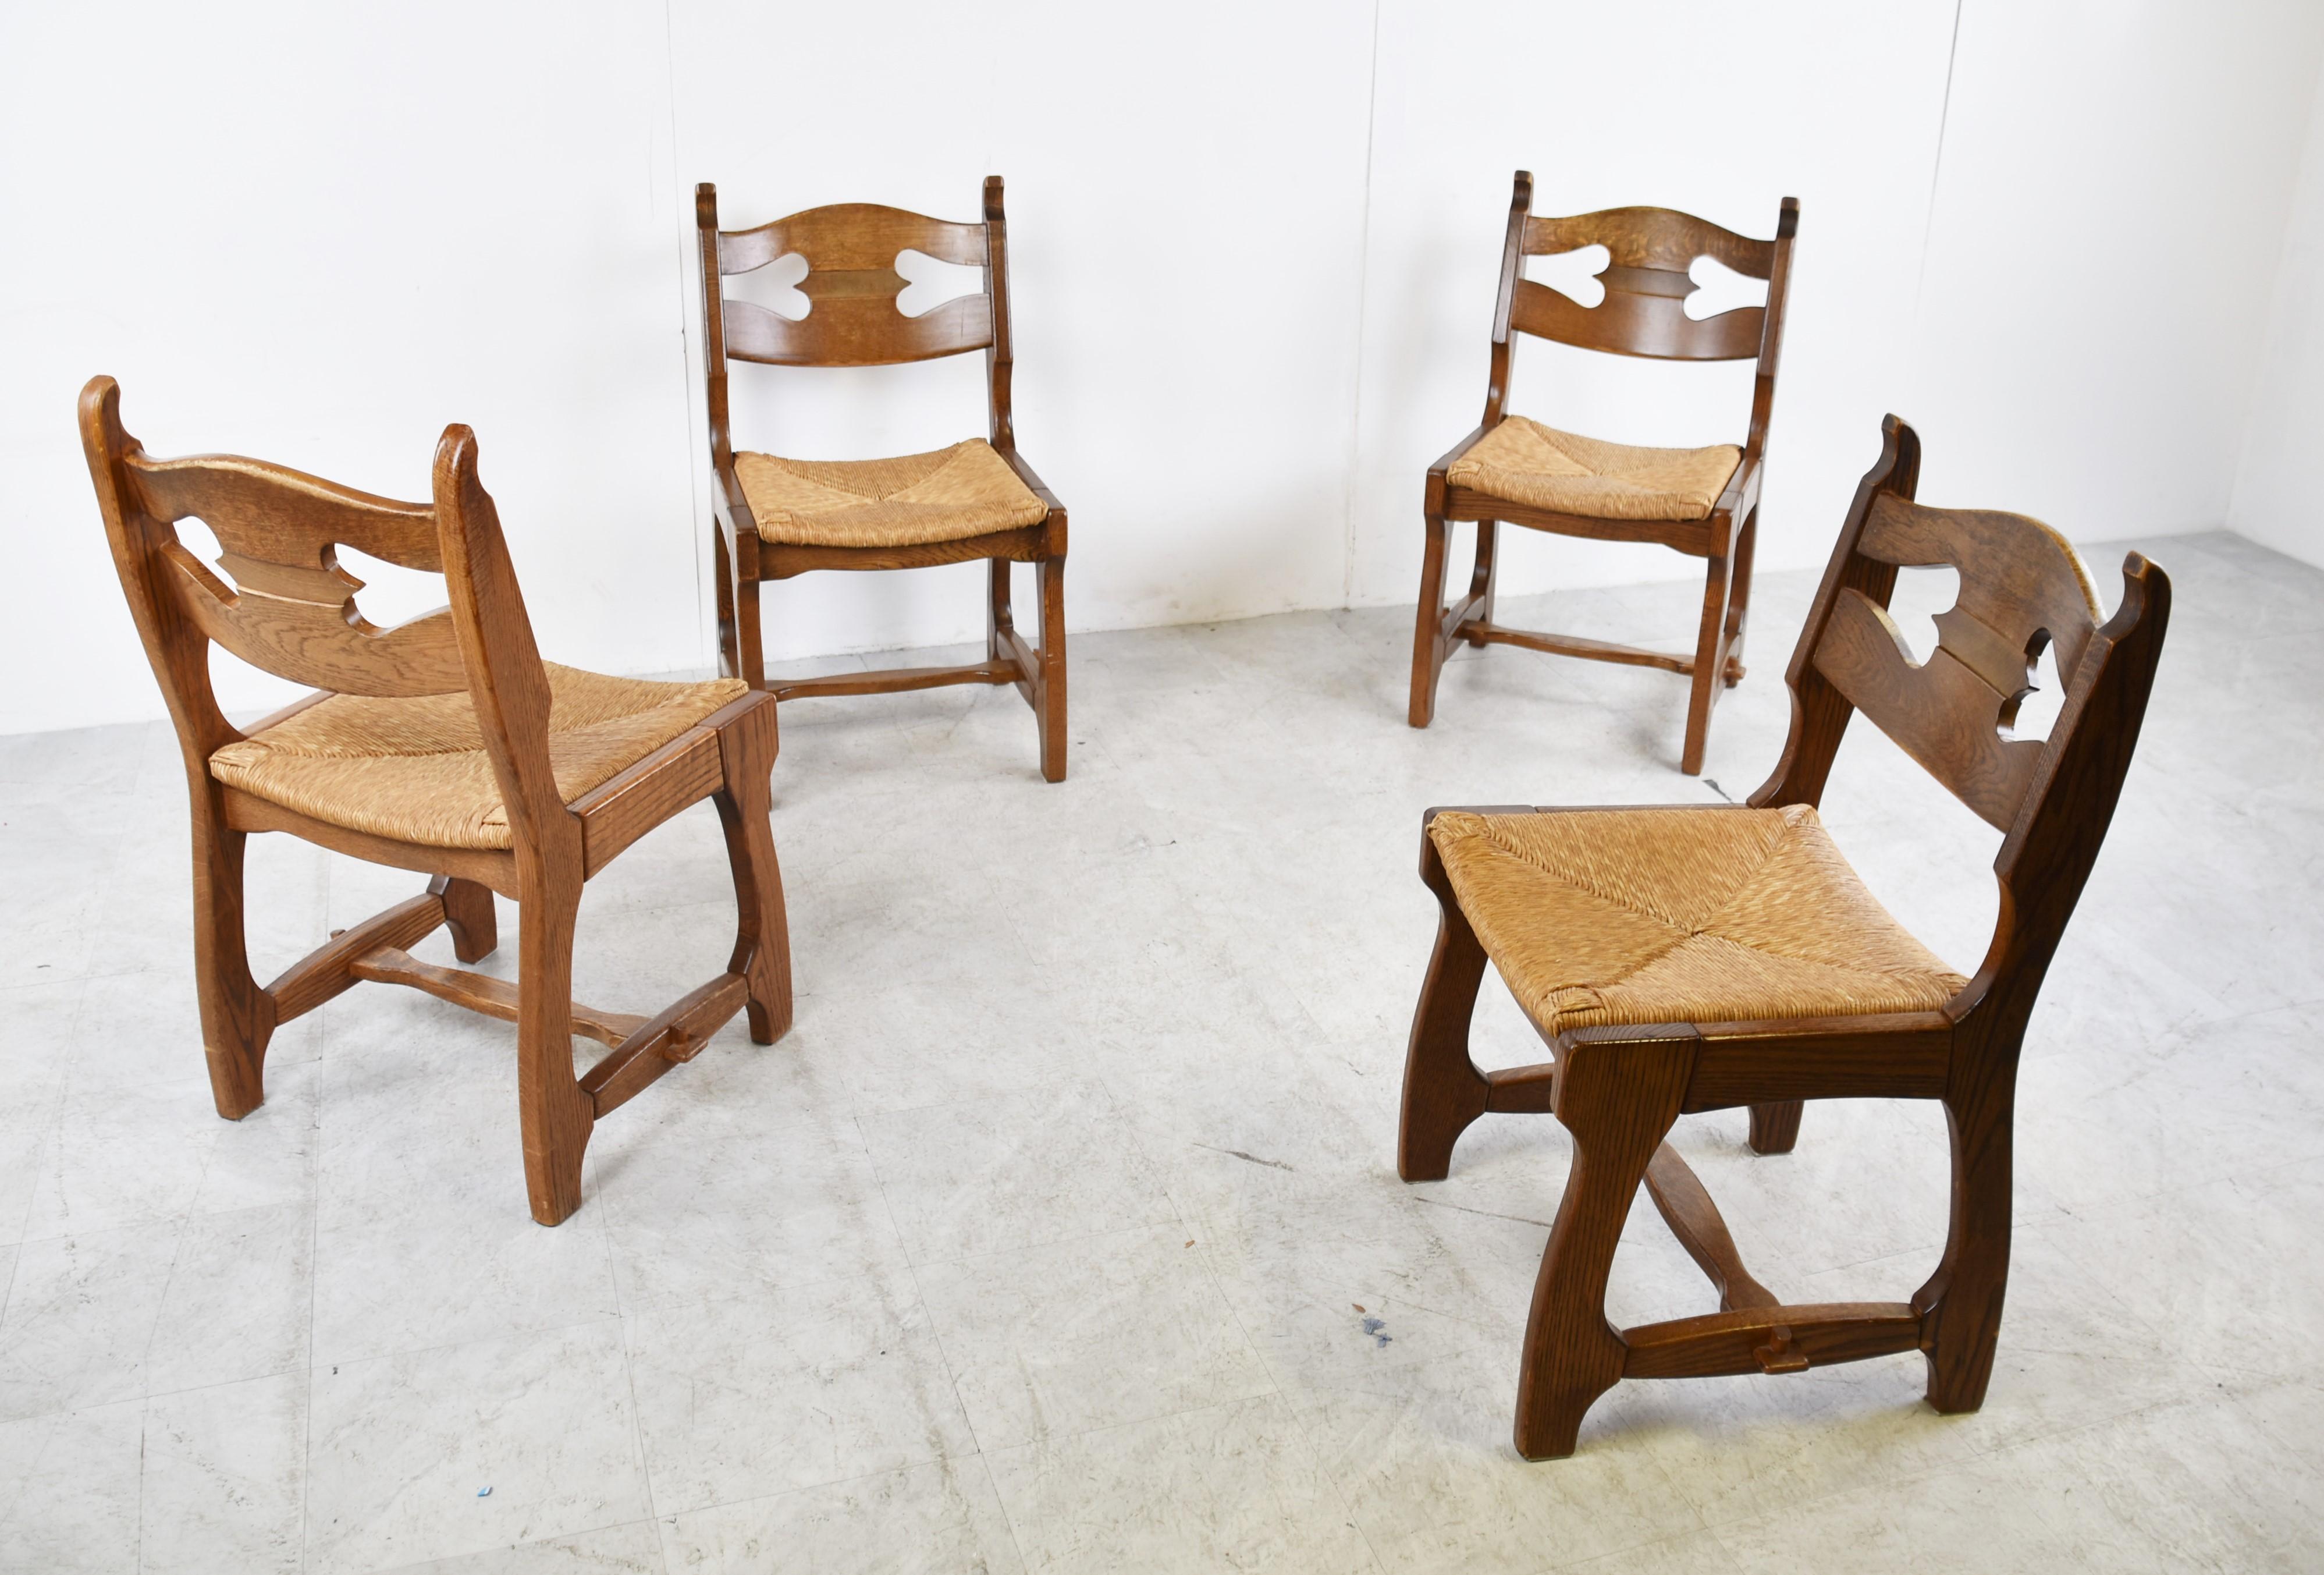 Vintage Oak and Wicker Brutalist Dining Chairs, 1960s For Sale 4